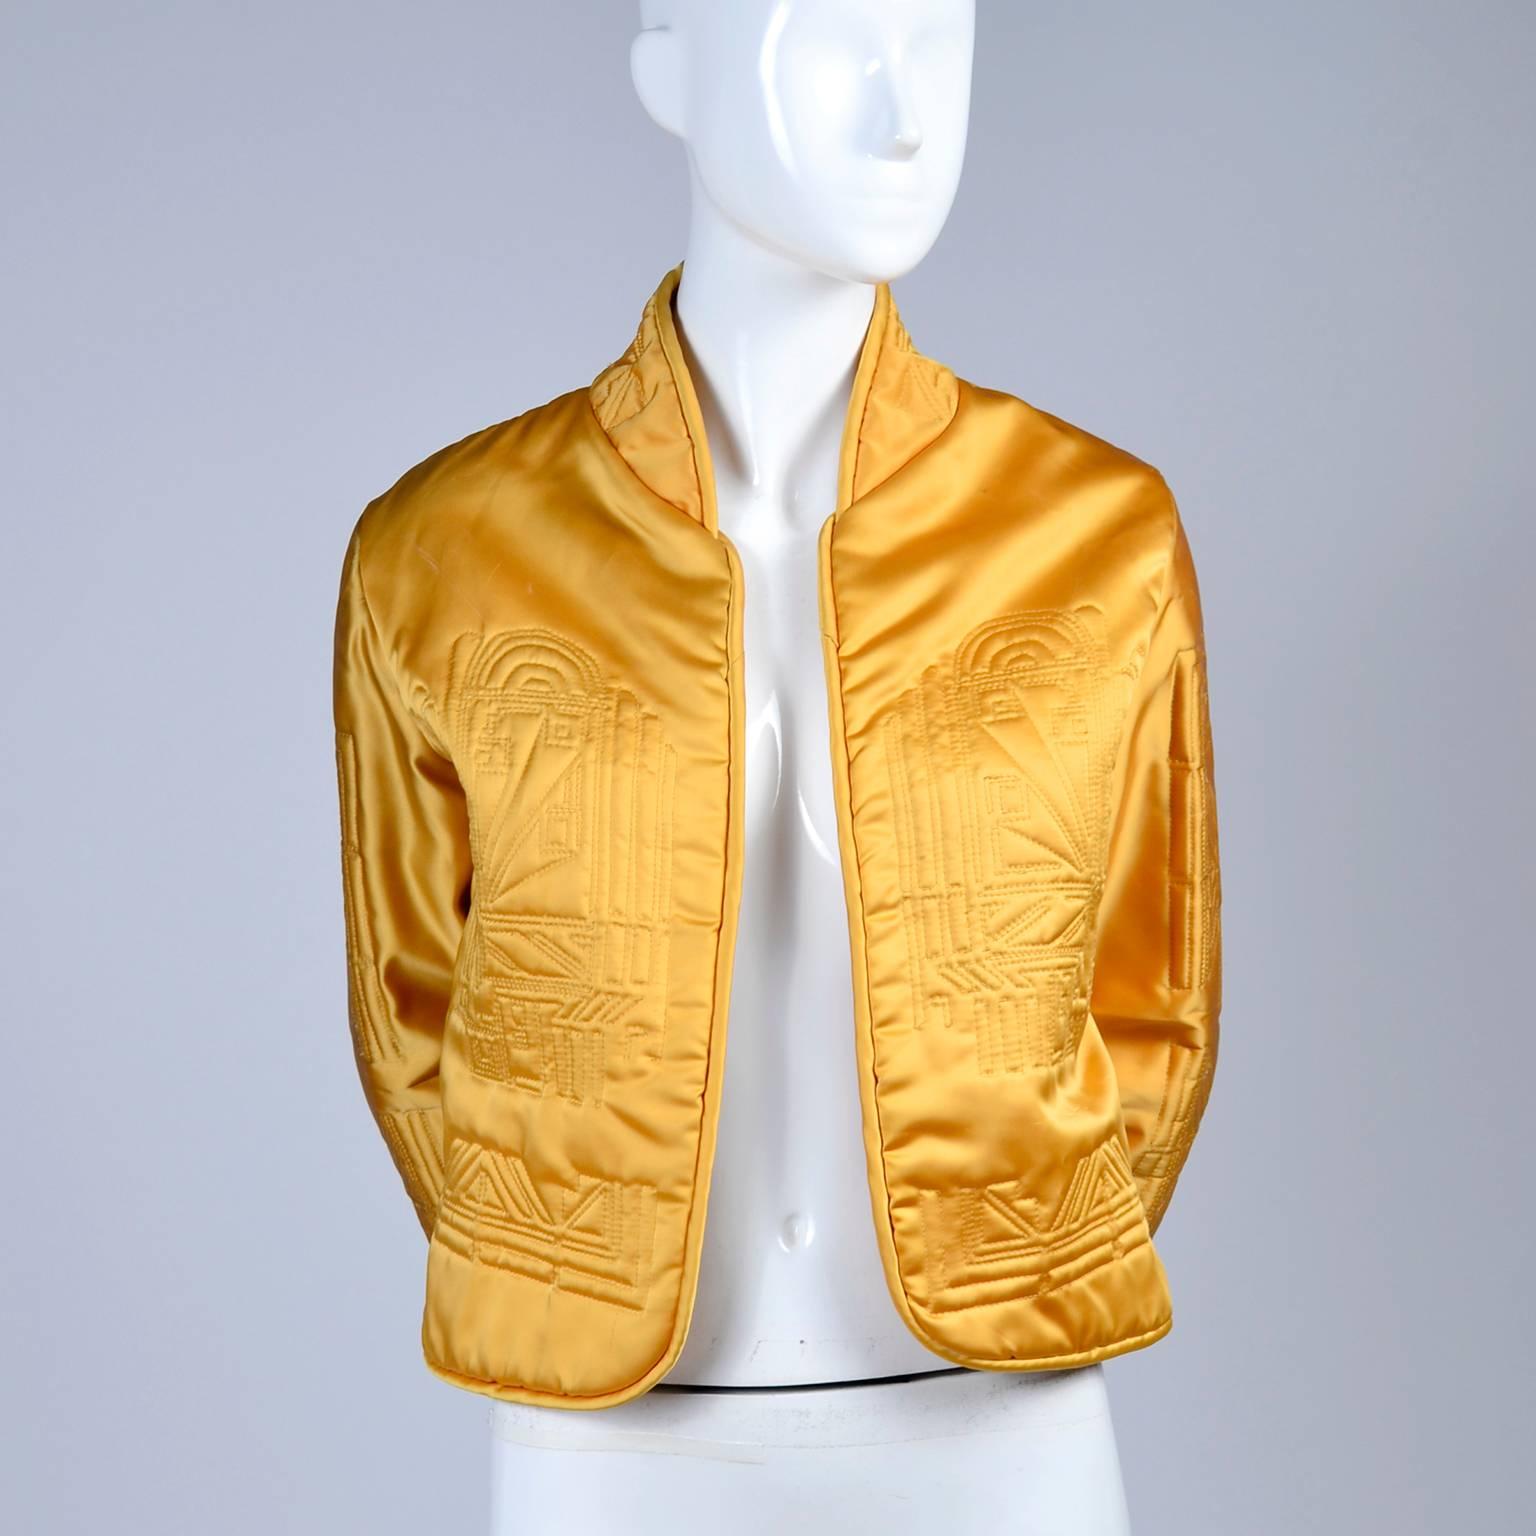 gold quilted fabric